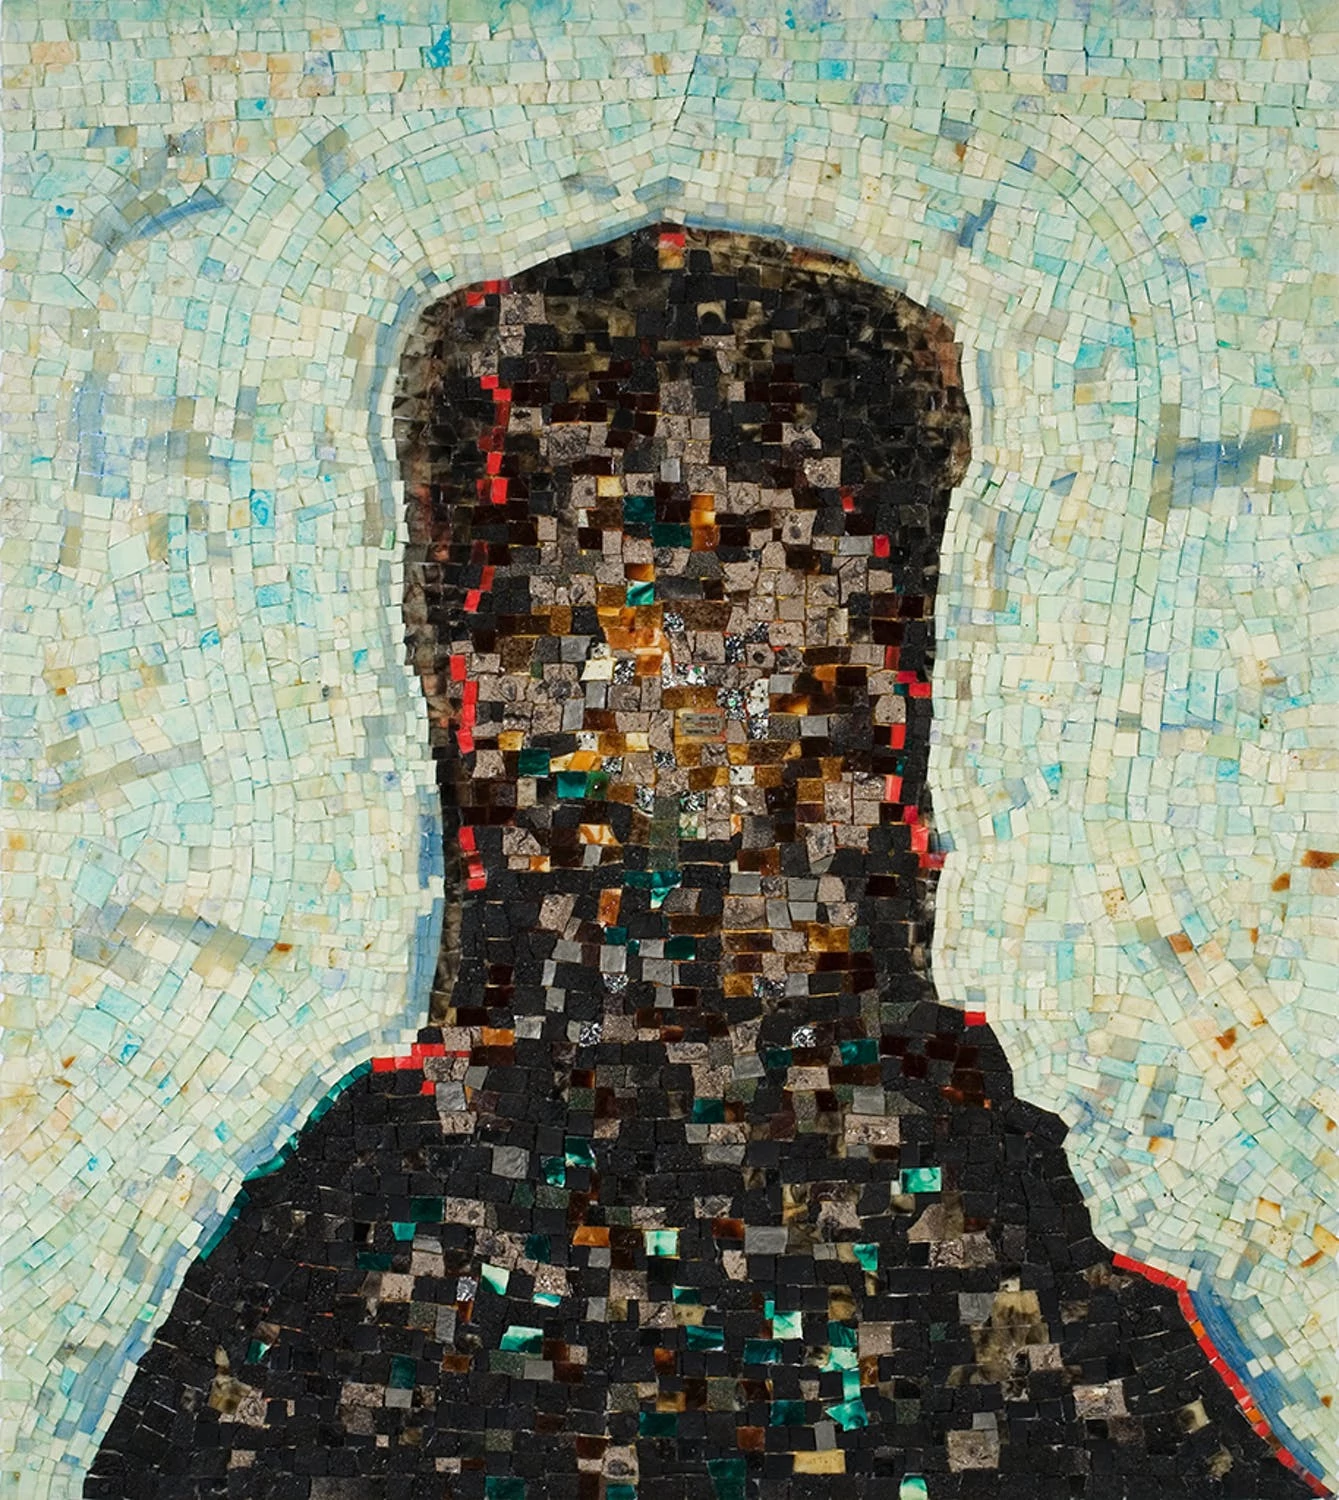 Black Monolith, II: Homage To Ralph Ellison The Invisible Man, Jack Whitten